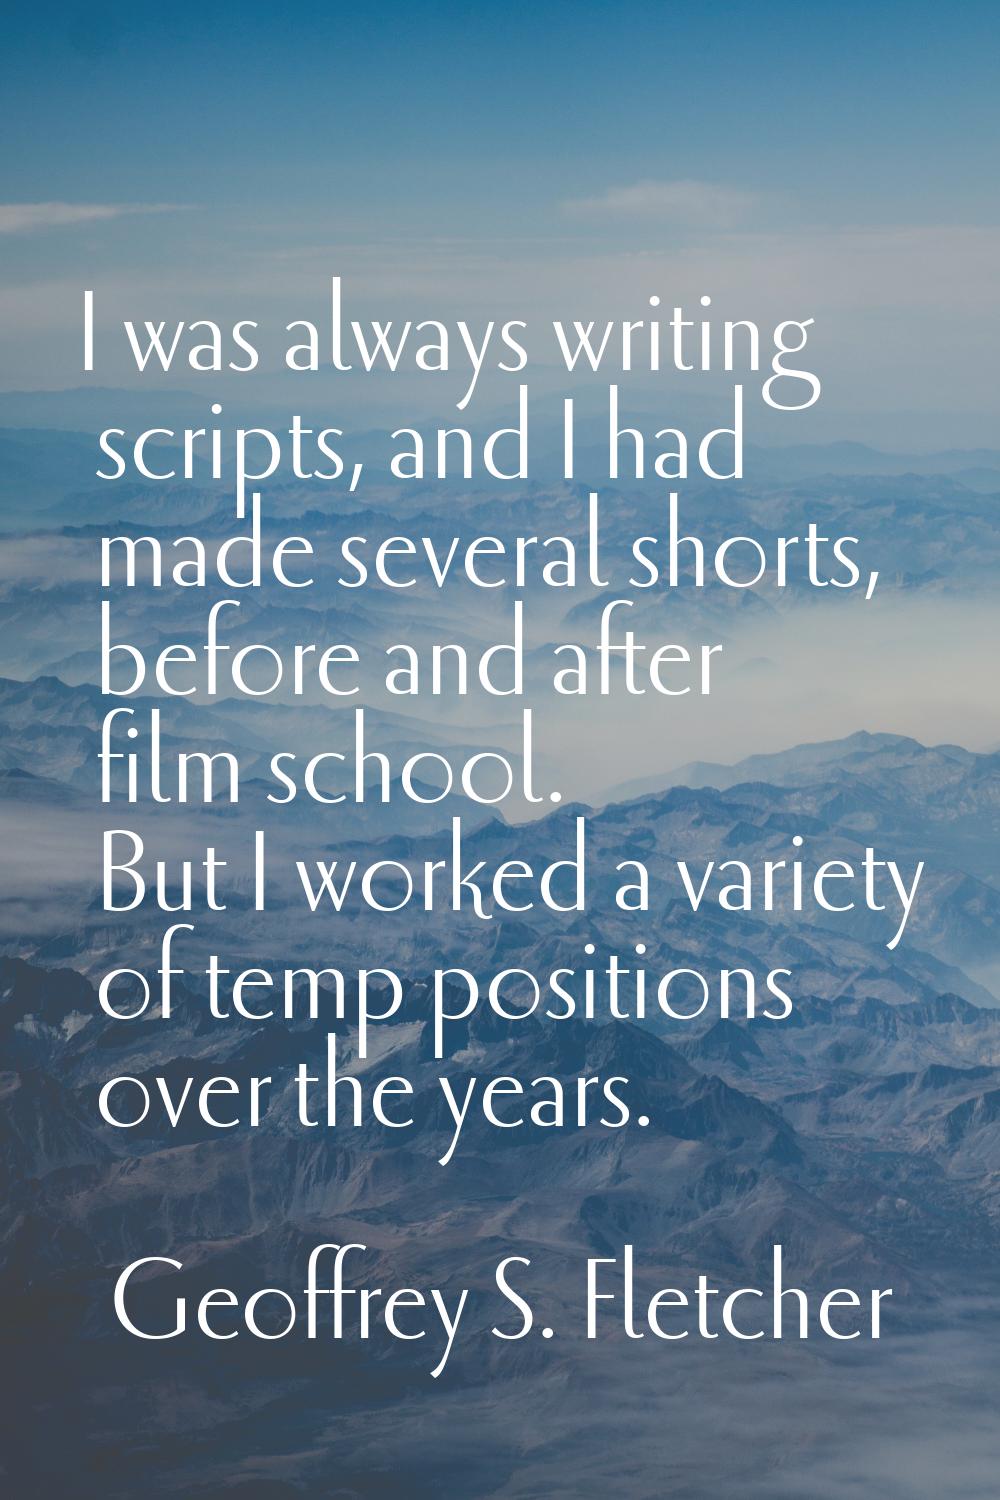 I was always writing scripts, and I had made several shorts, before and after film school. But I wo